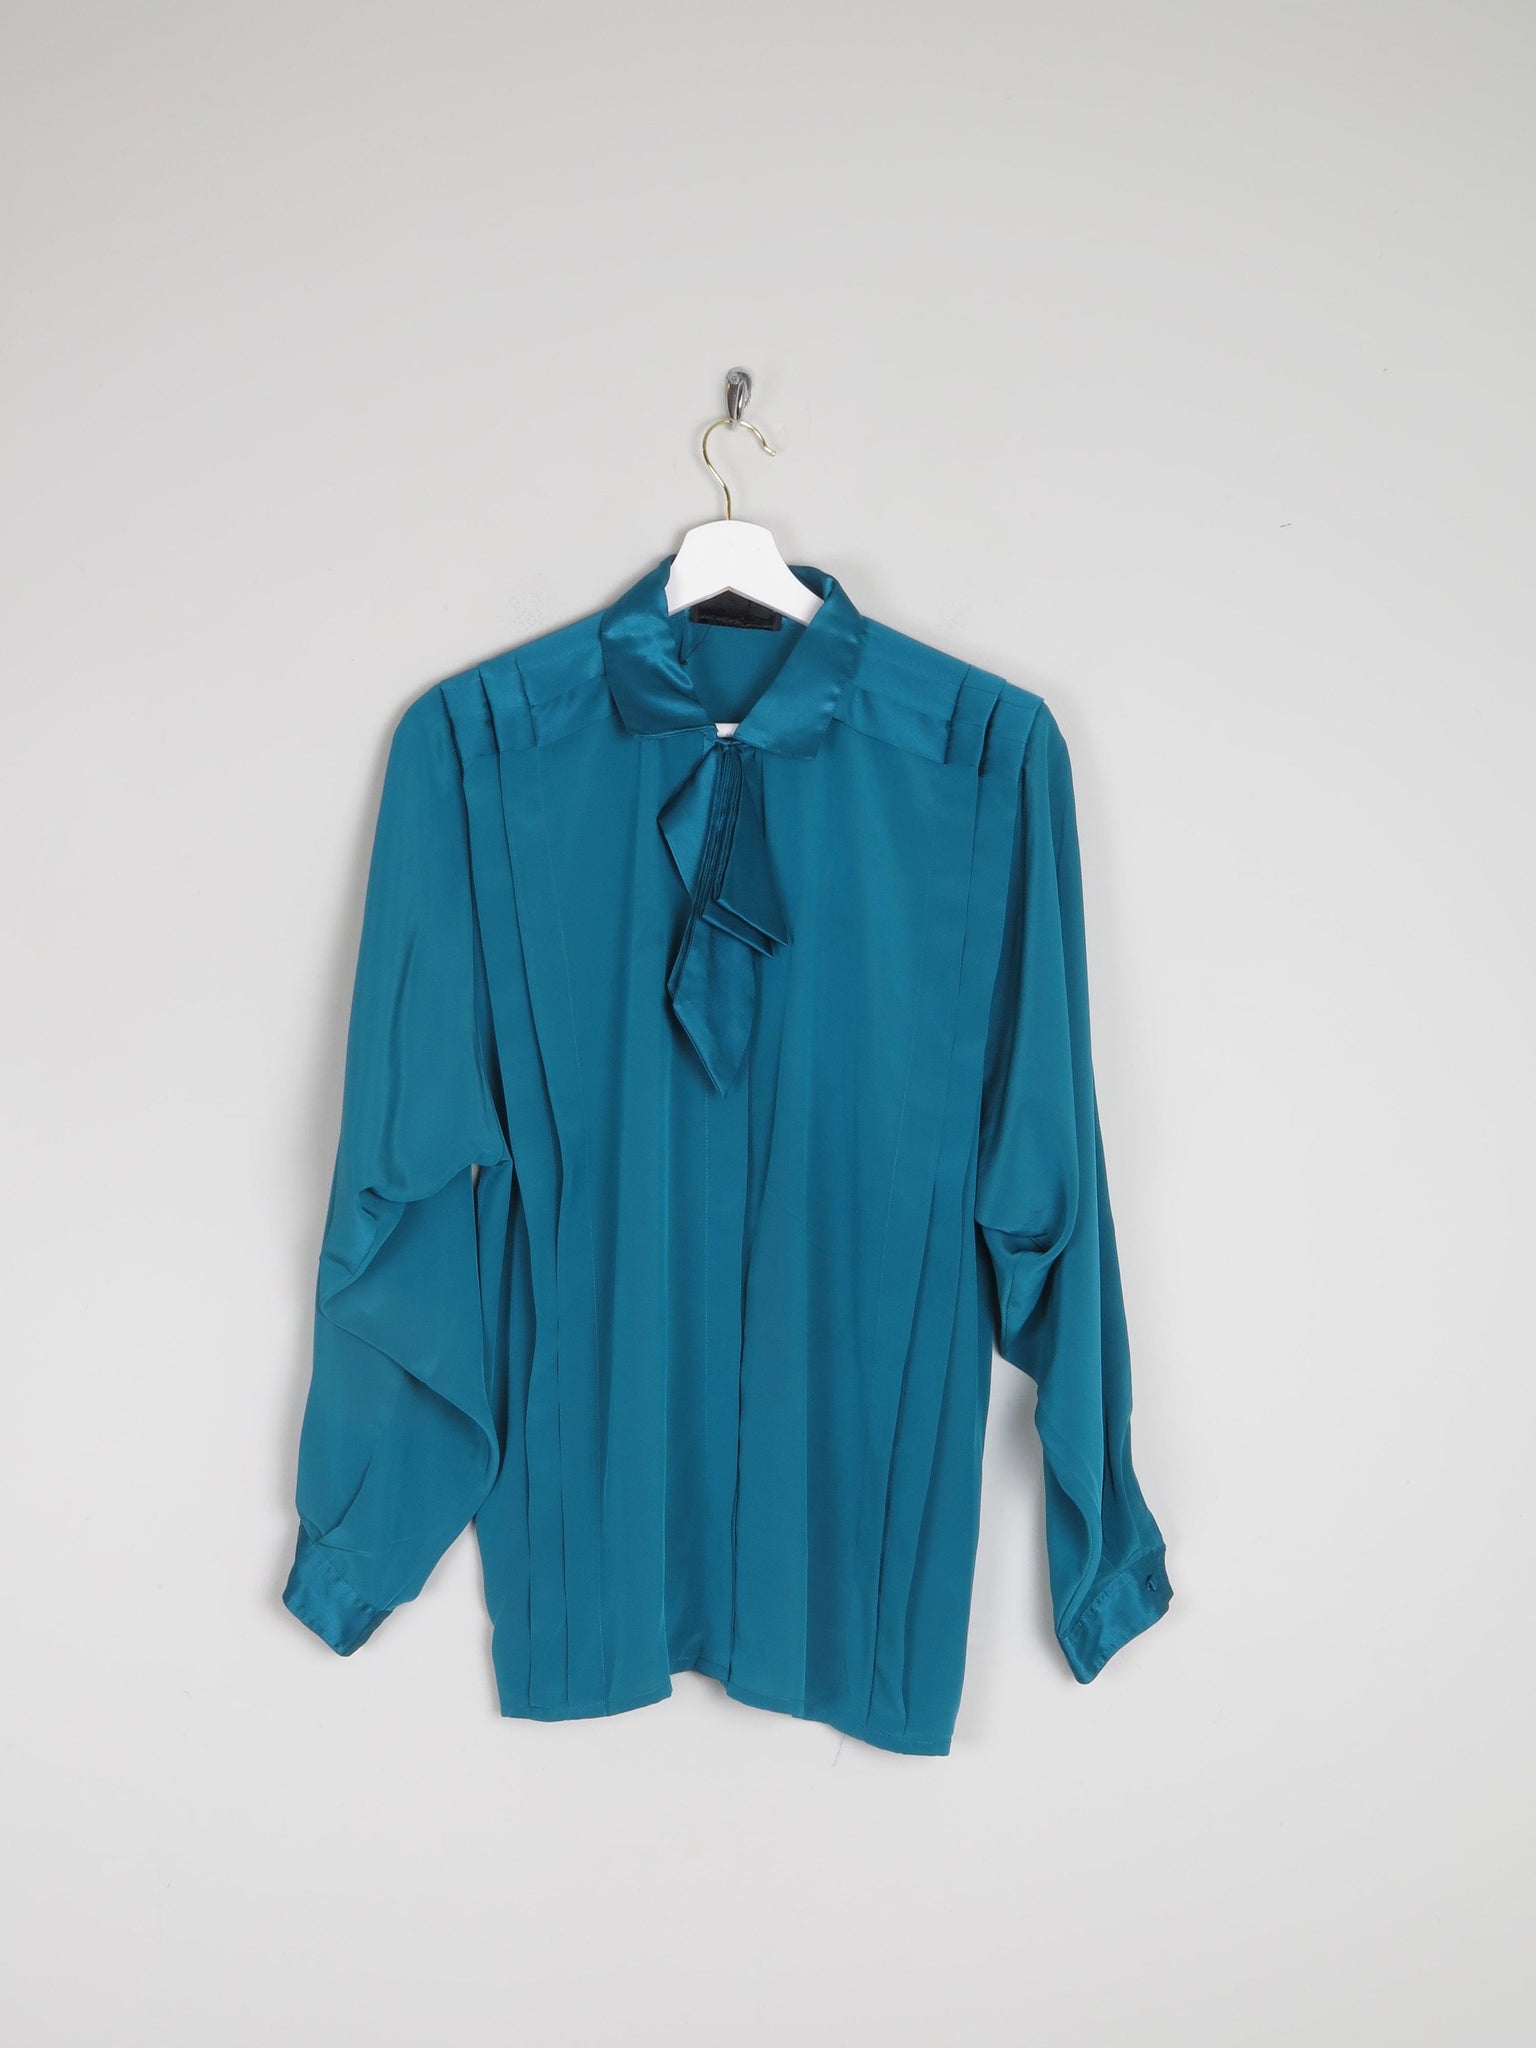 Women's Vintage Aqua Green Blouse With Bow Detail XS/S - The Harlequin